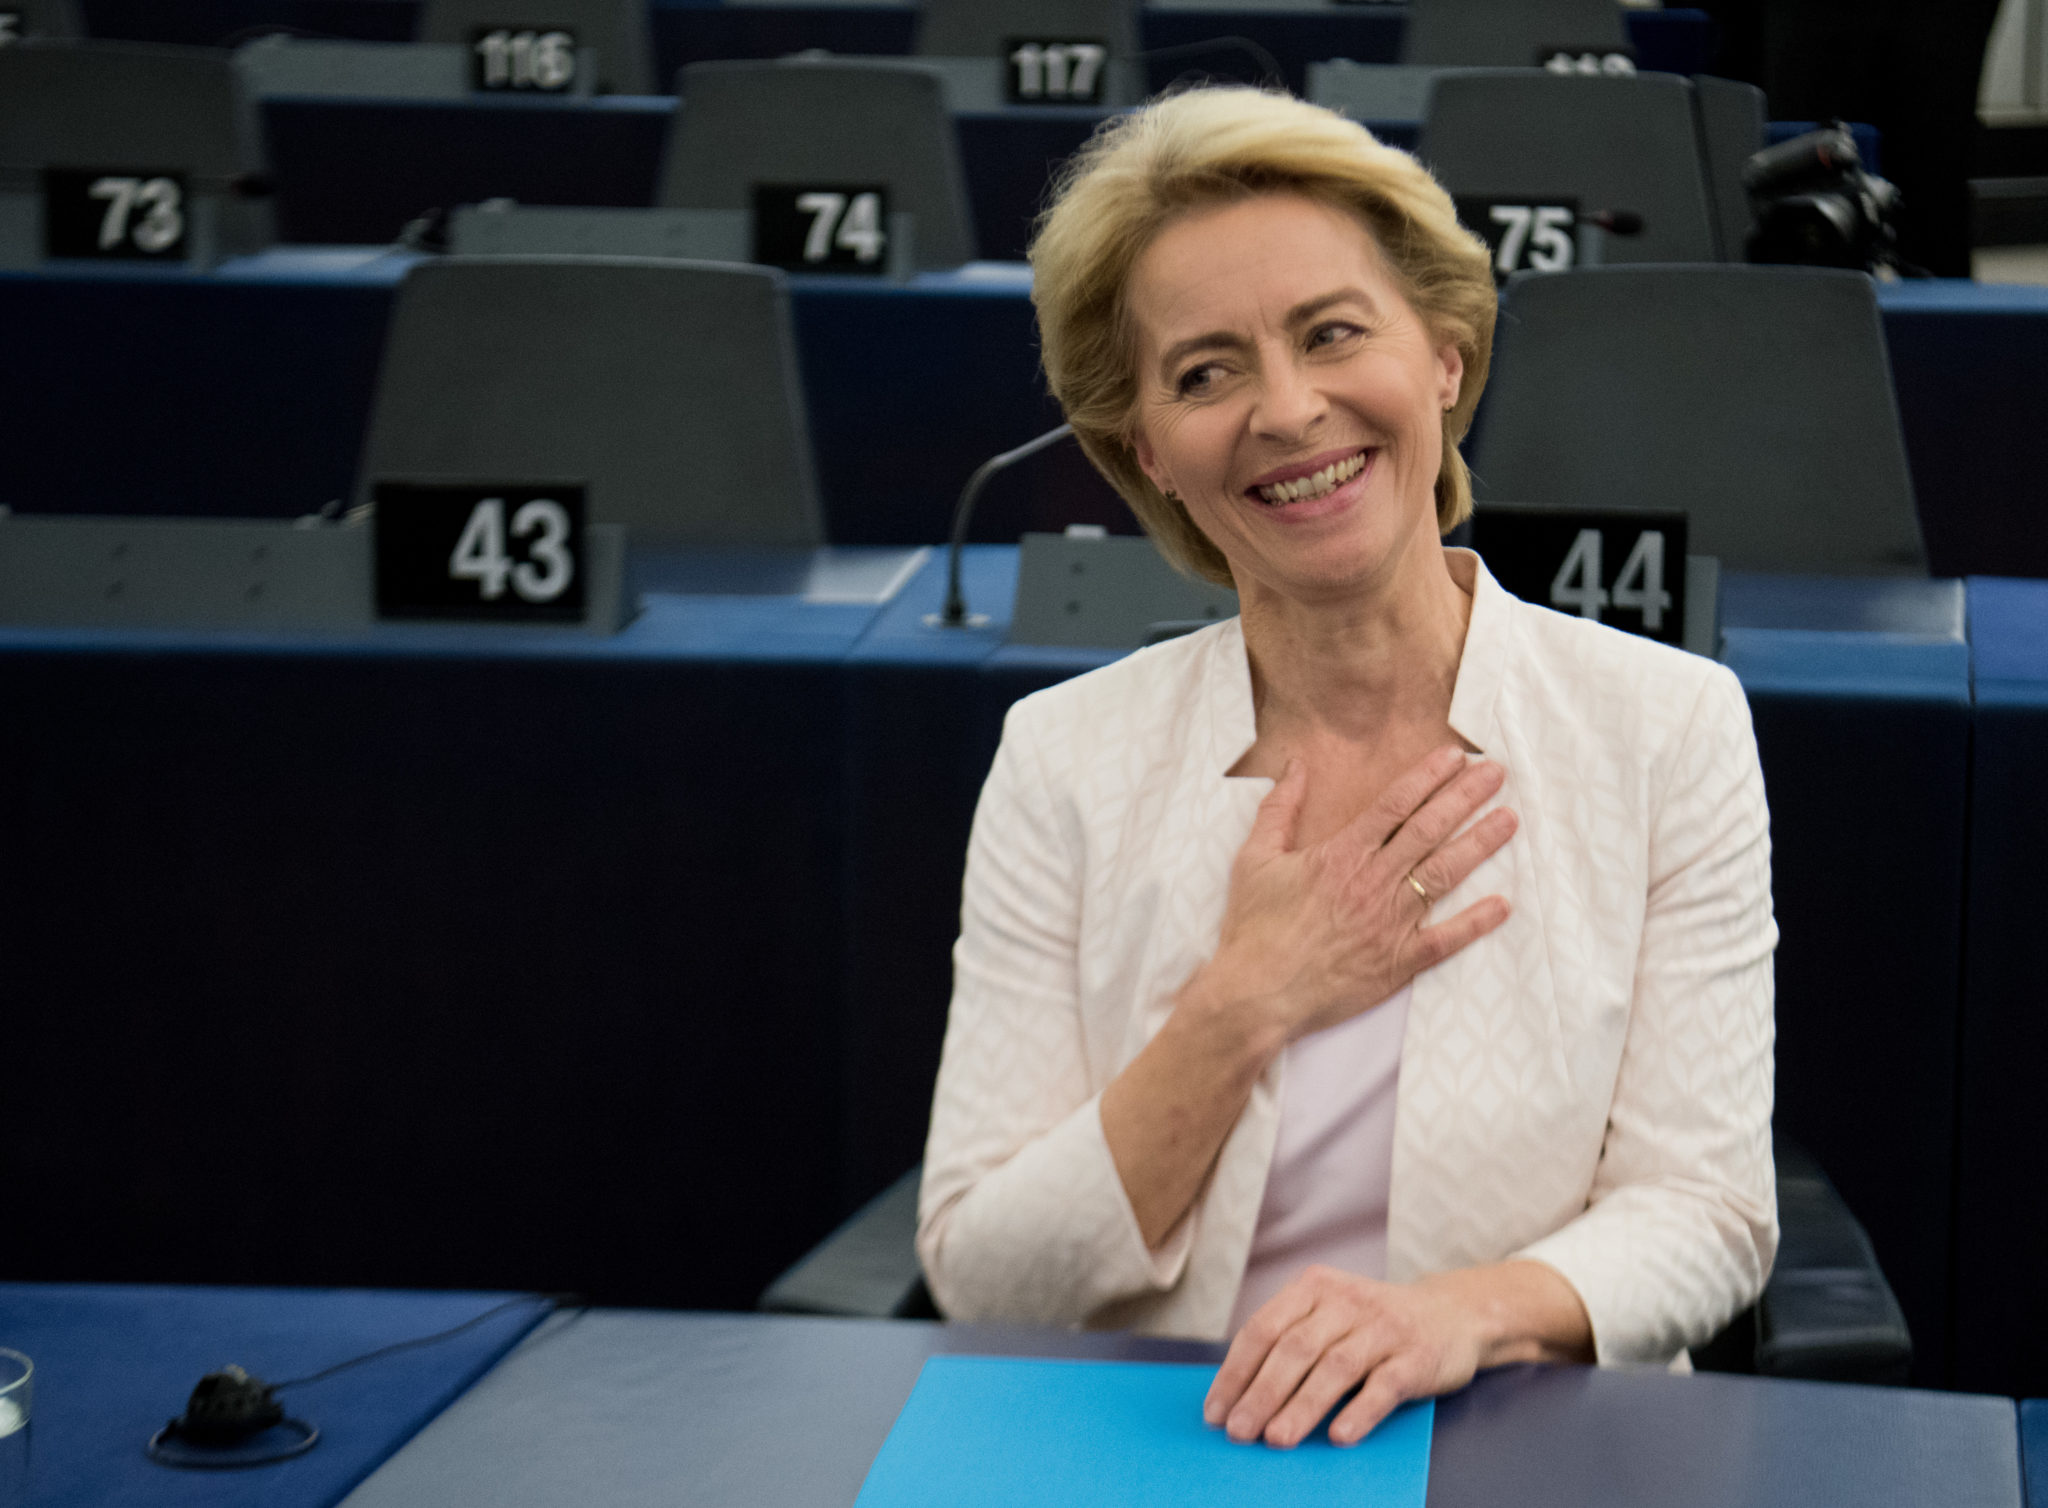 Ursula Von der Leyen, President elect of the EC, at the Plenary session of the EP